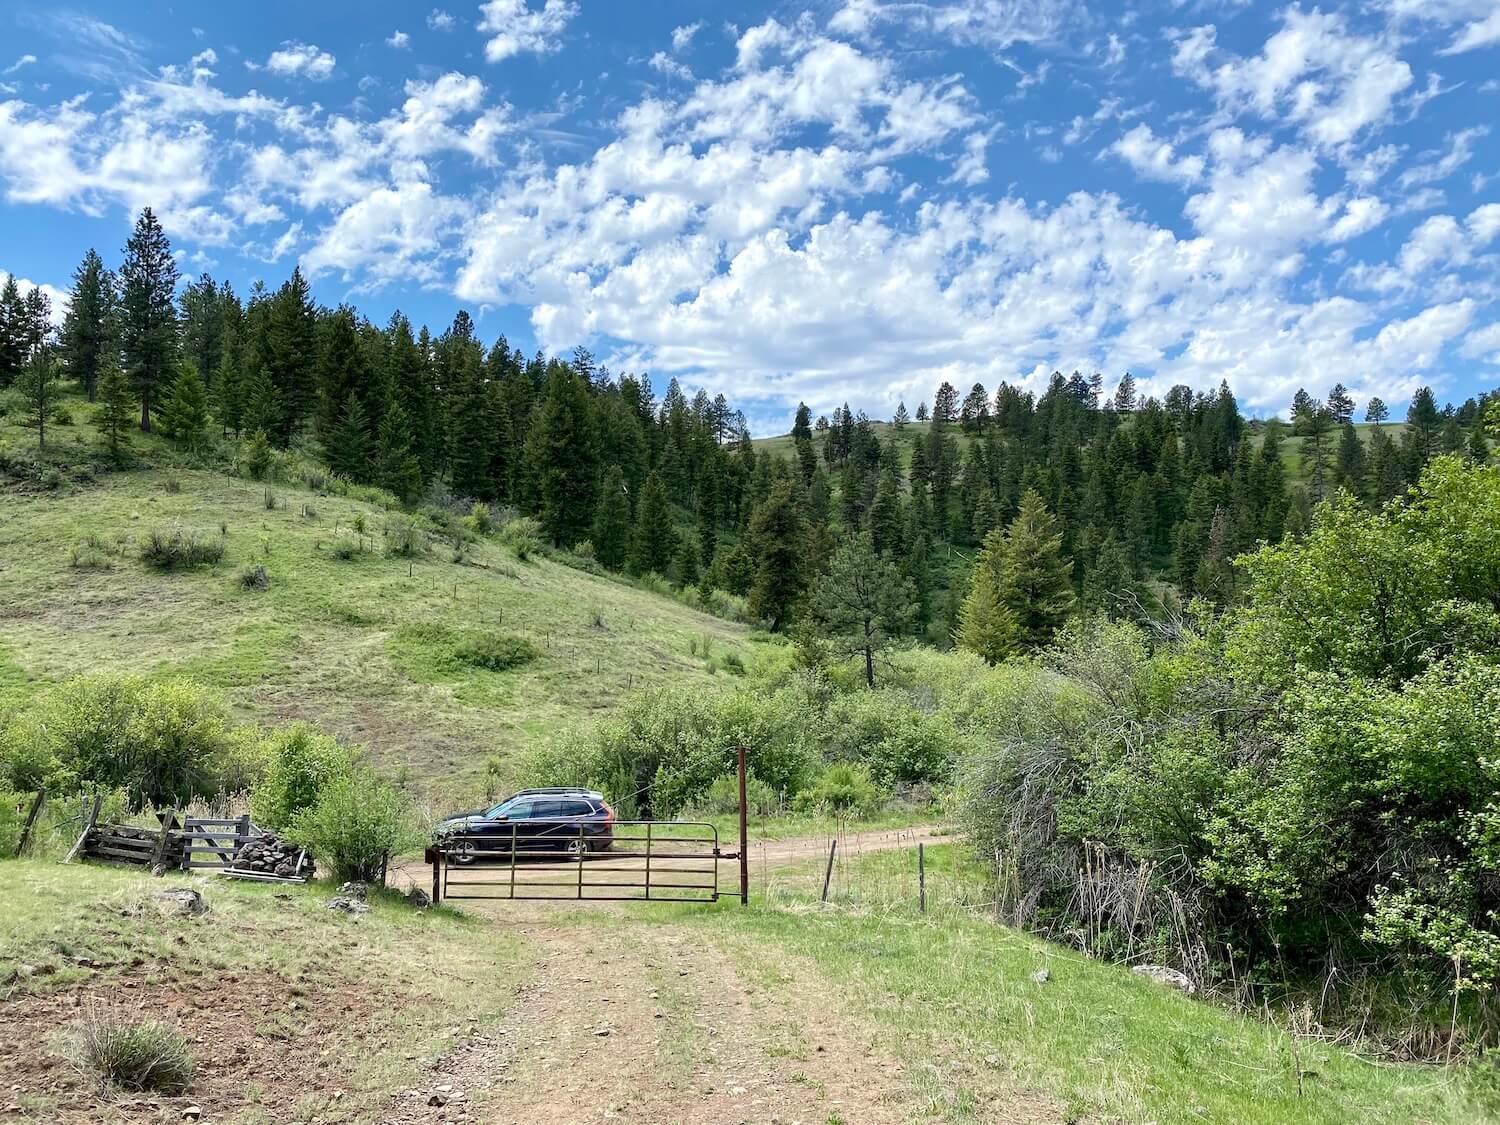 A blue SUV sits at the end of this dirt ranch road behind a gate near Zumwalt Preserve in Northeast Oregon.  The sky is peppered with white fluffy clouds and the hill above the vehicle has a fir tree forest. 